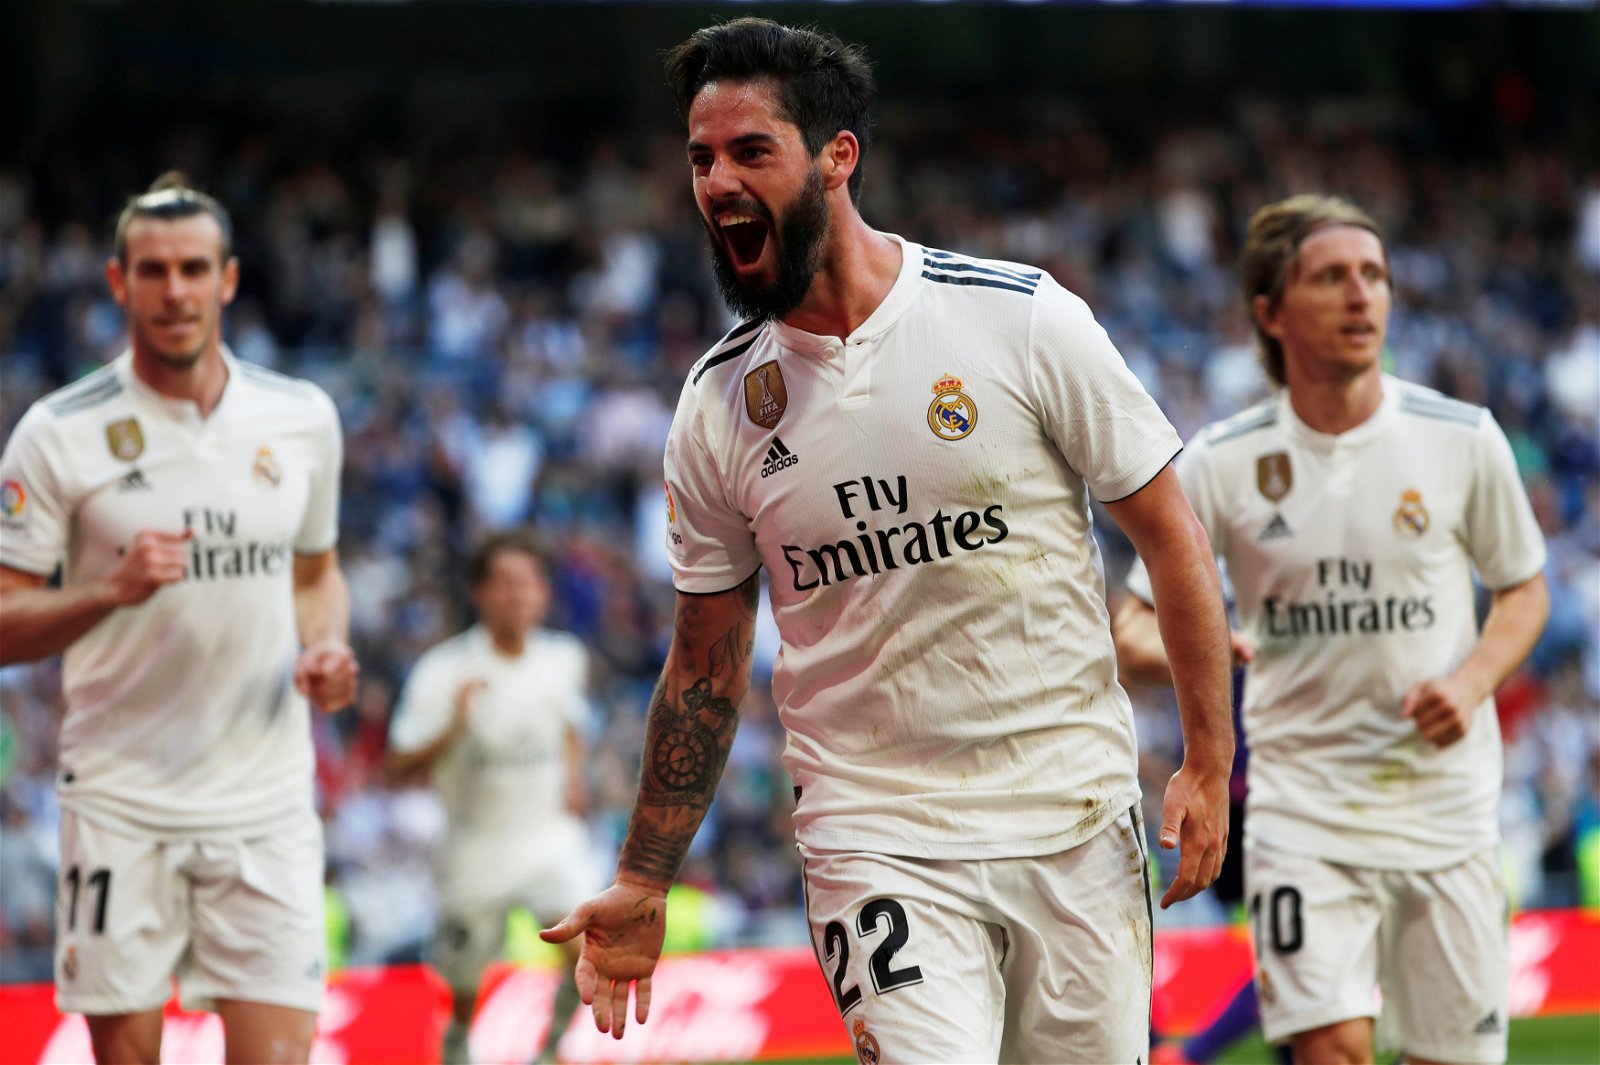 Real Madrid's injury crisis deepens with Isco injured 1